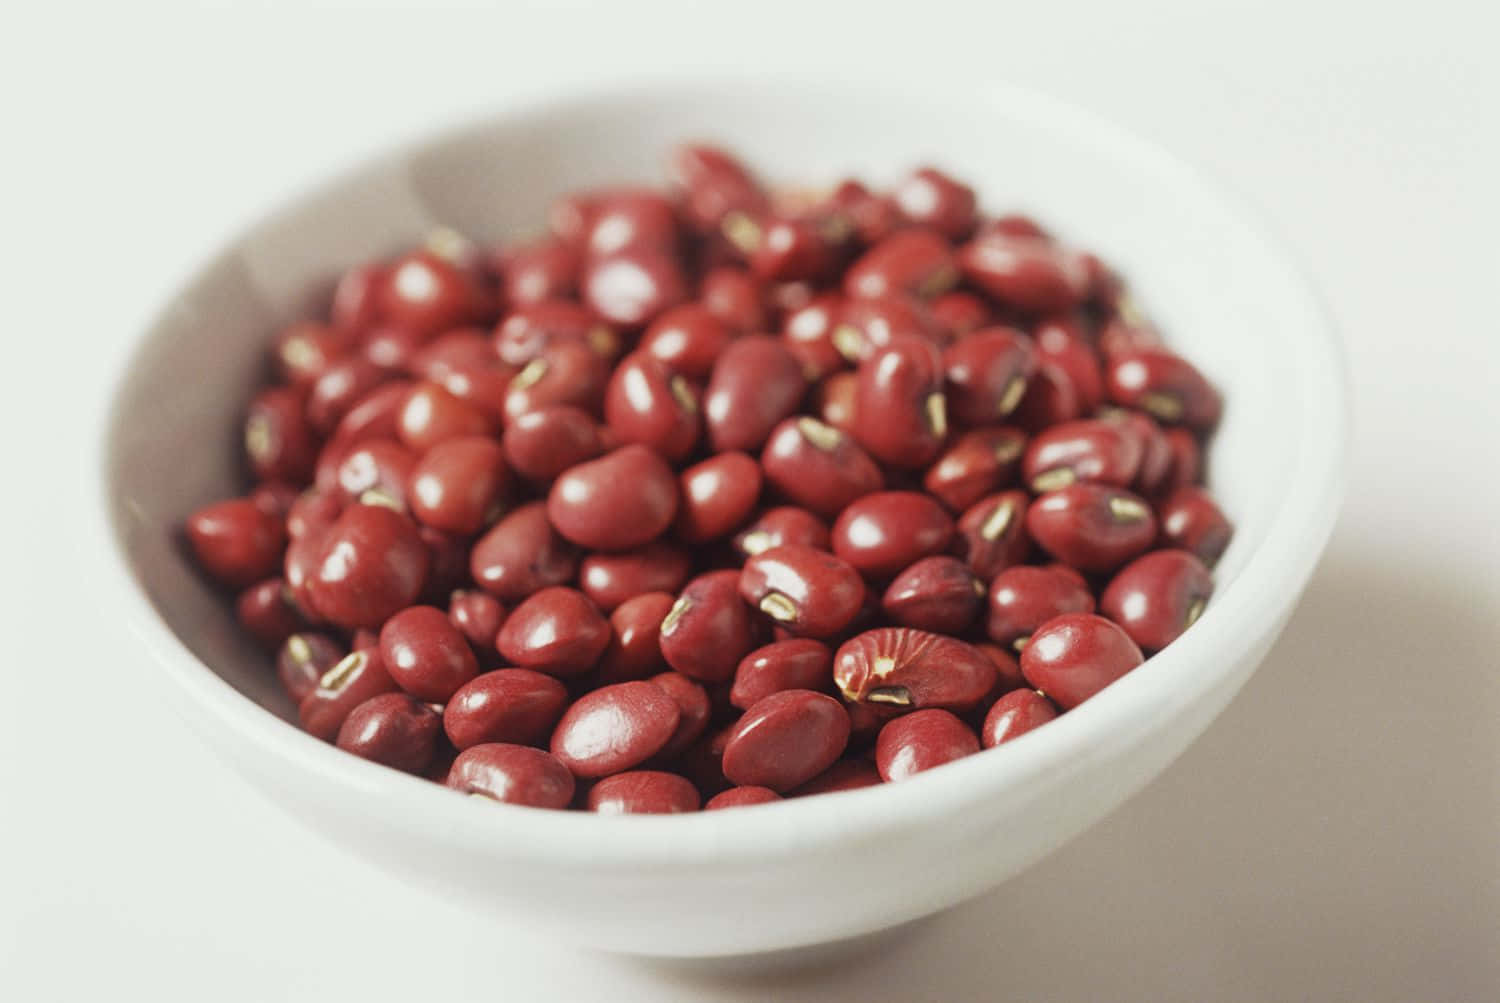 A close-up view of red beans Wallpaper